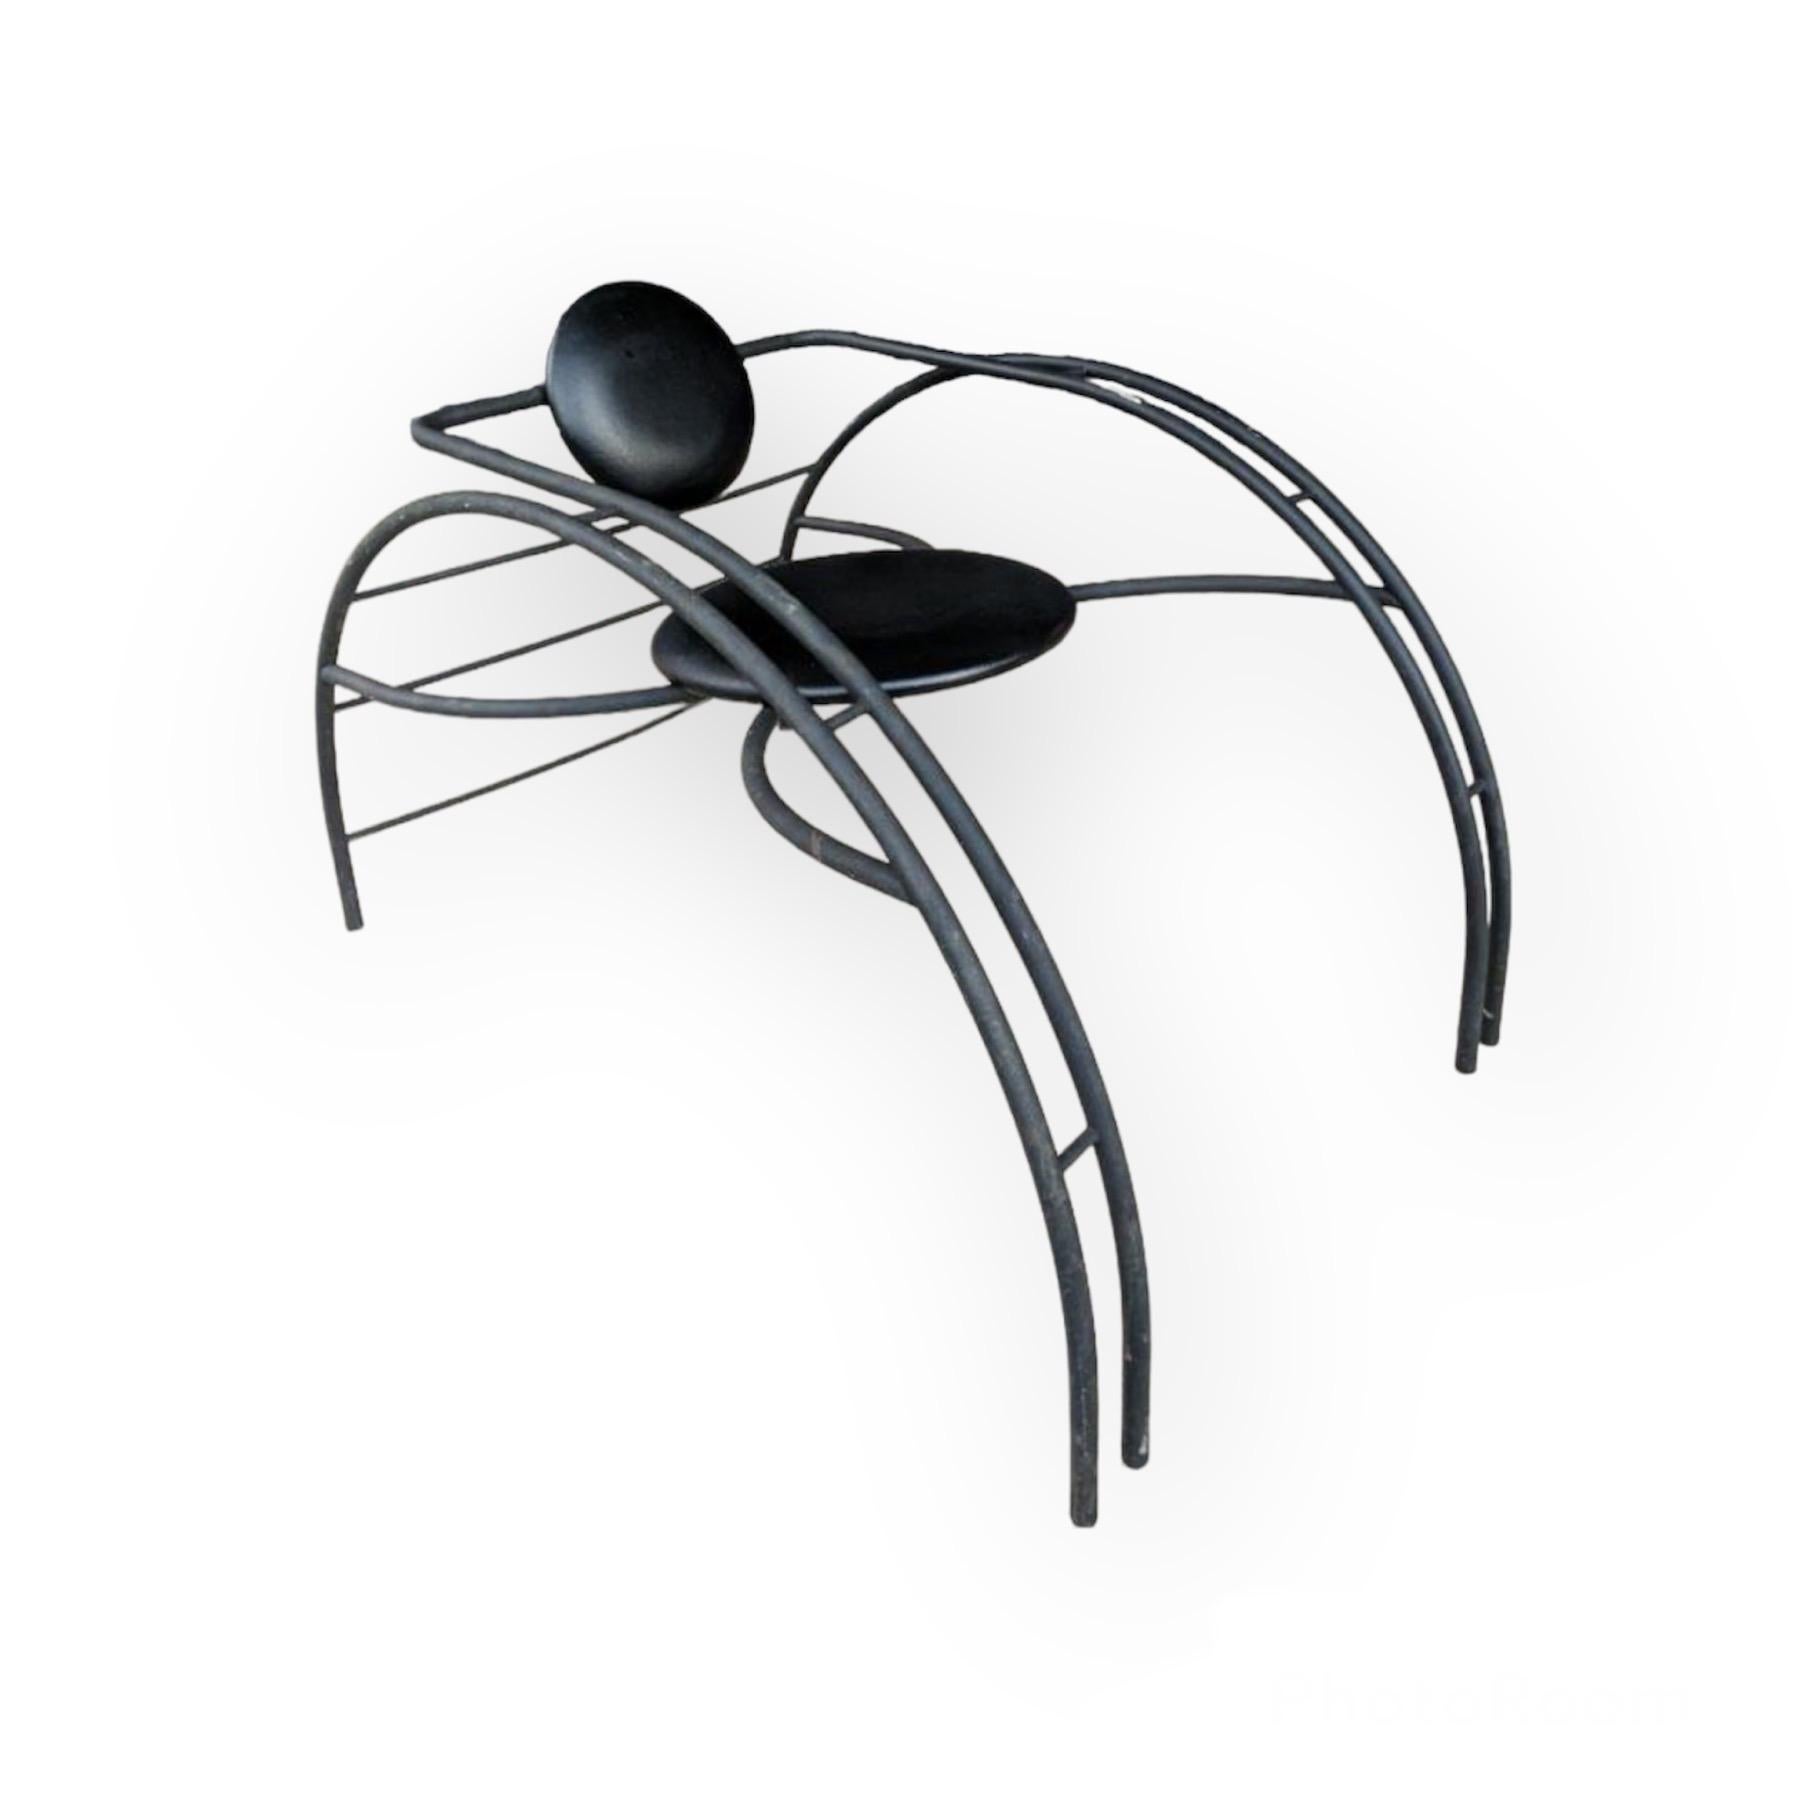 Postmodern Quebec 69 spider chair, designed in the early 1980's by Canadian design group Les Industries Amisco. This piece is truly a statement chair, in a particularly unusual form. The frame of the chair is of black powder-coated steel, and it has